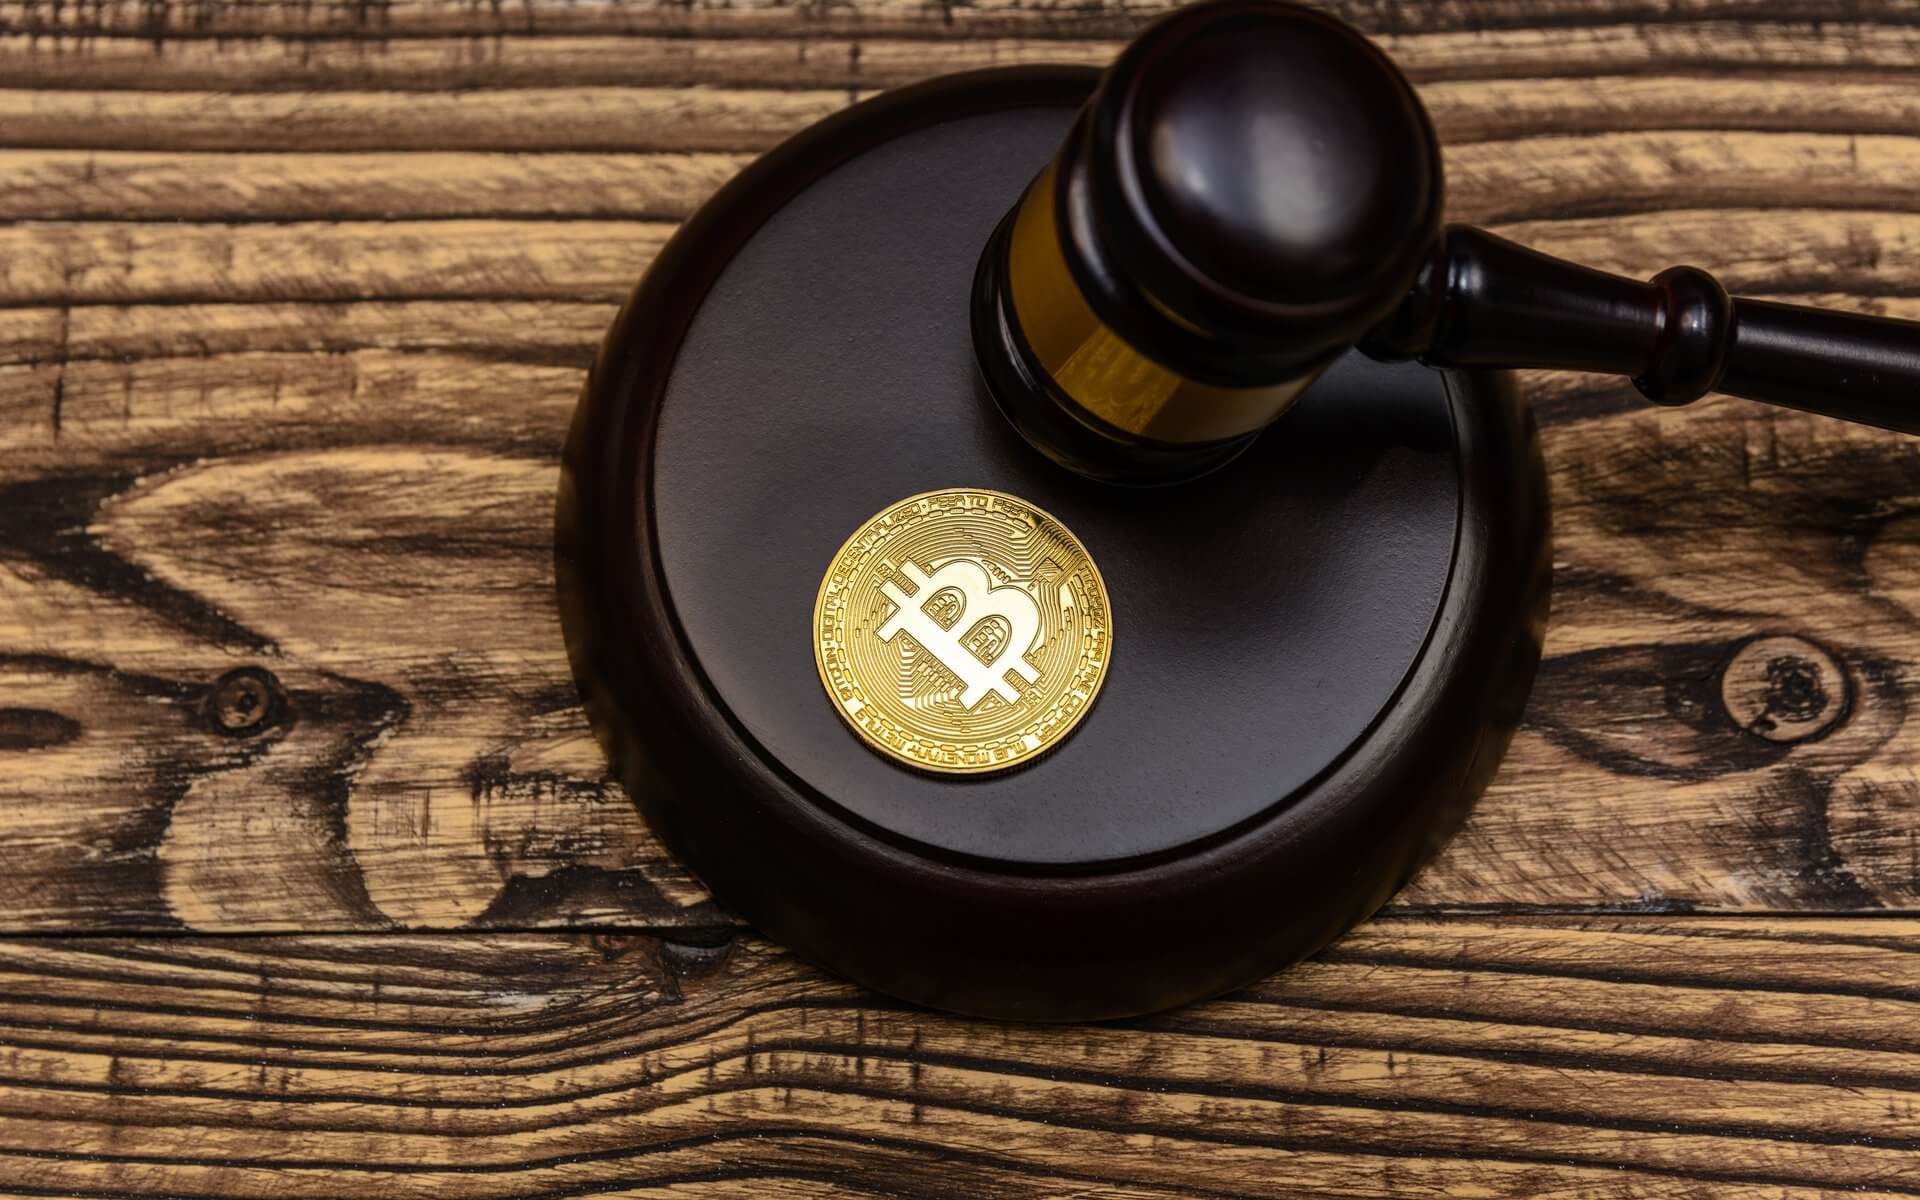 Cameron and Tyler Winklevoss of the Gemini Exchange in New York are suing early bitcoin investor Charlie Shrem for allegedly stealing roughly 5,000 BTC.